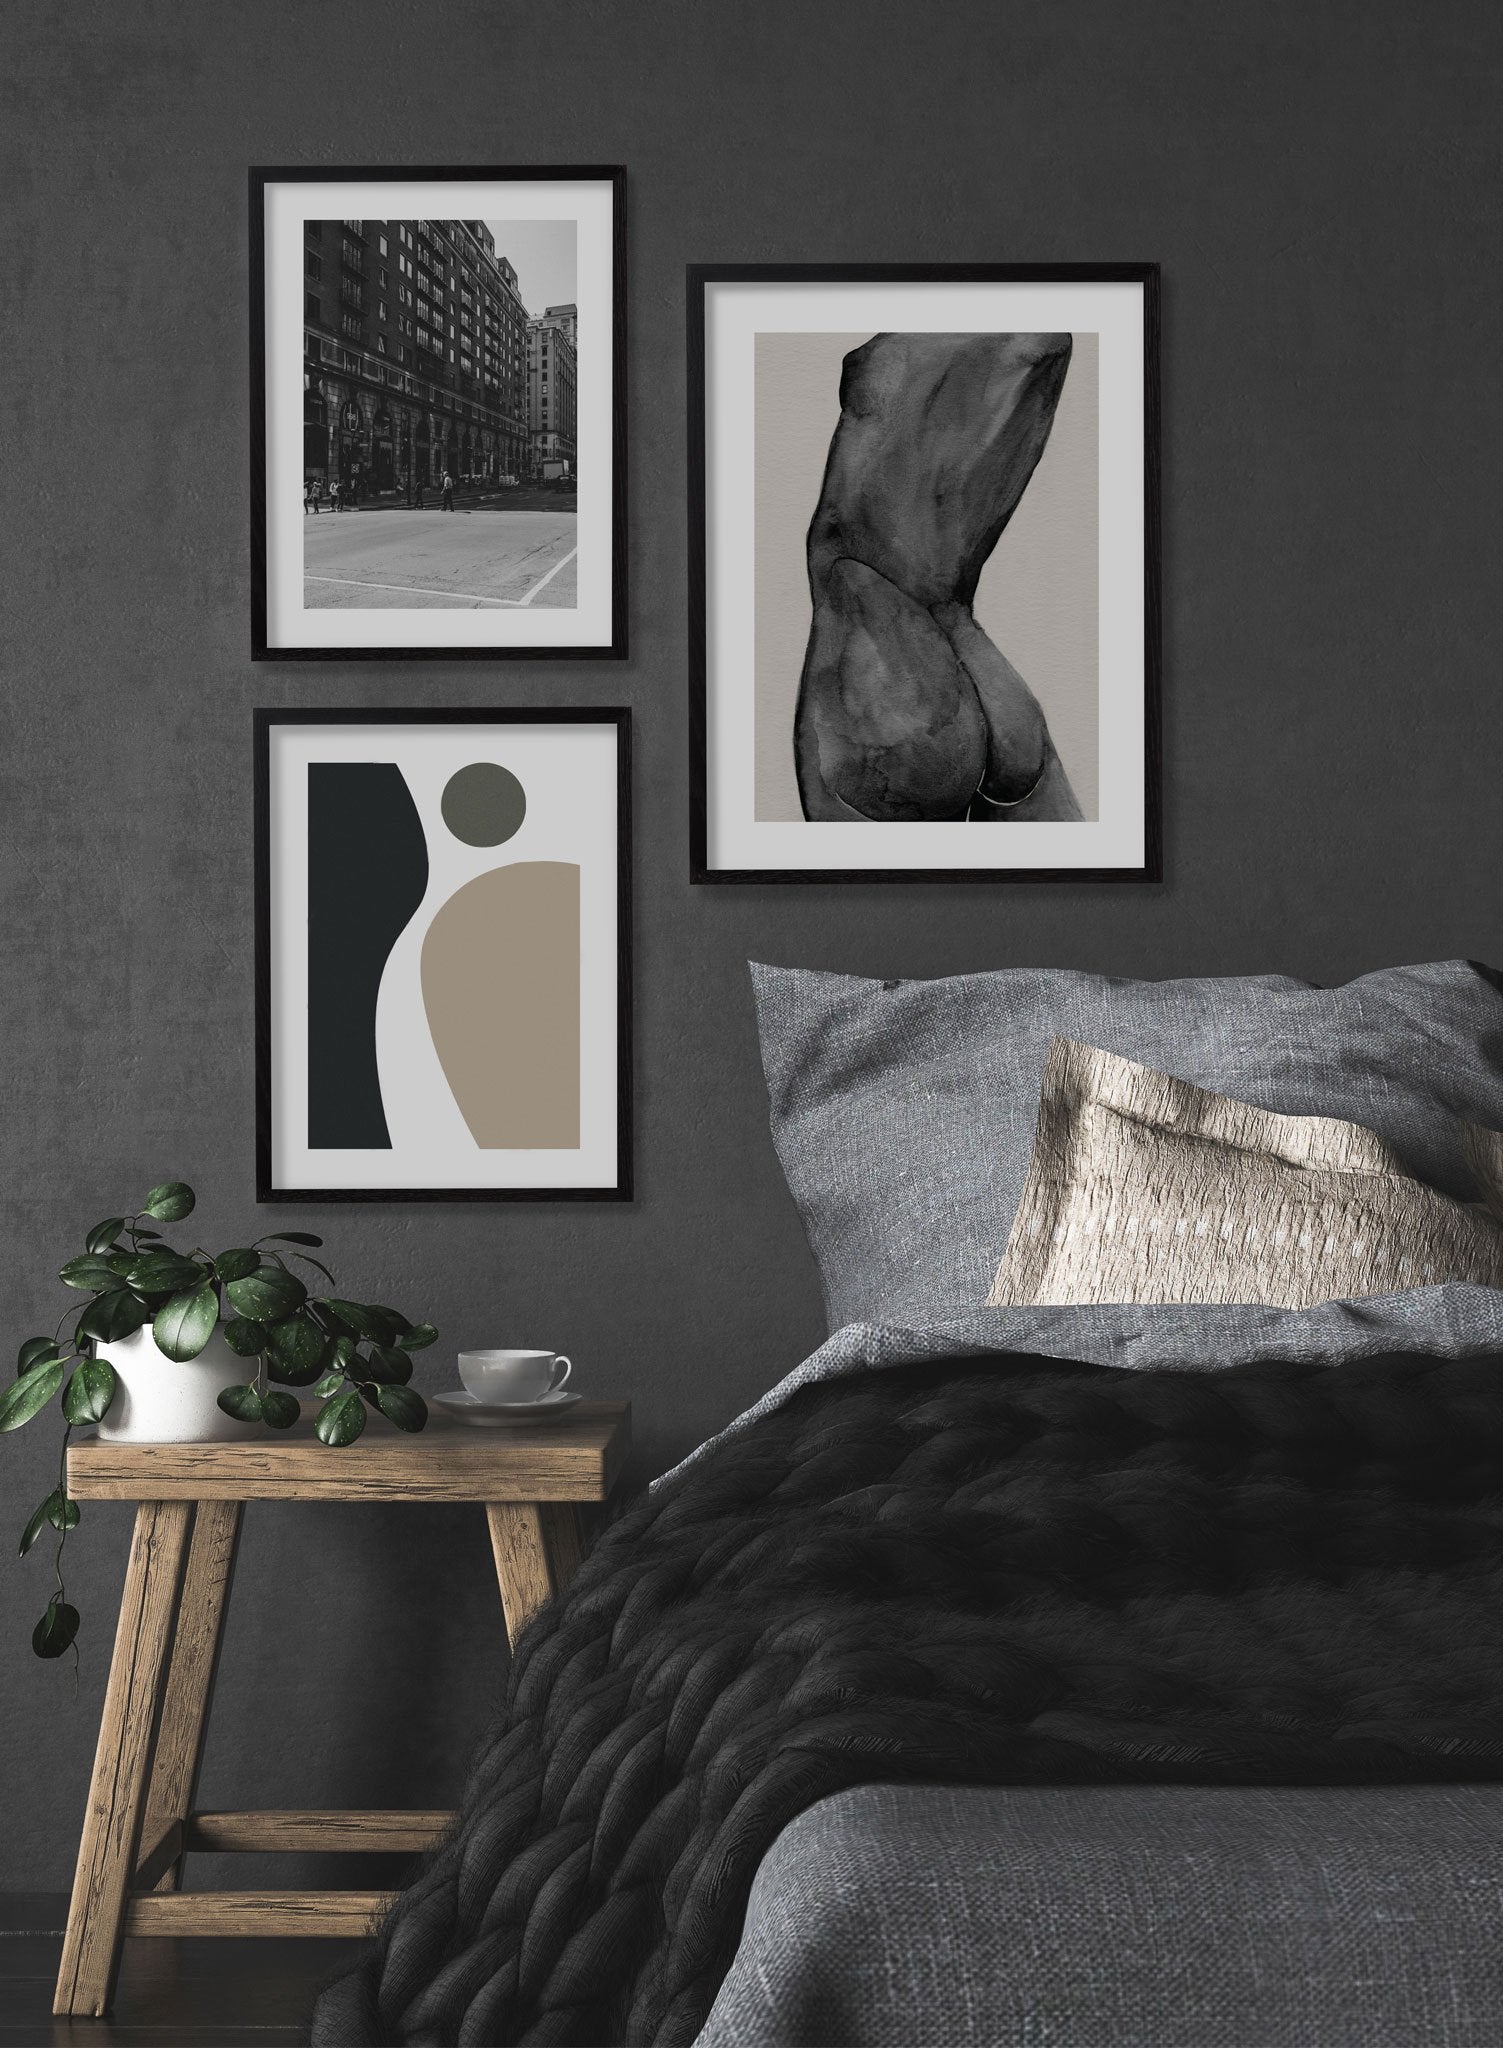 "Never Look Back" is a minimalist black and beige illustration poster by Opposite Wall of a female silhouette’s back and posterior over a beige background.